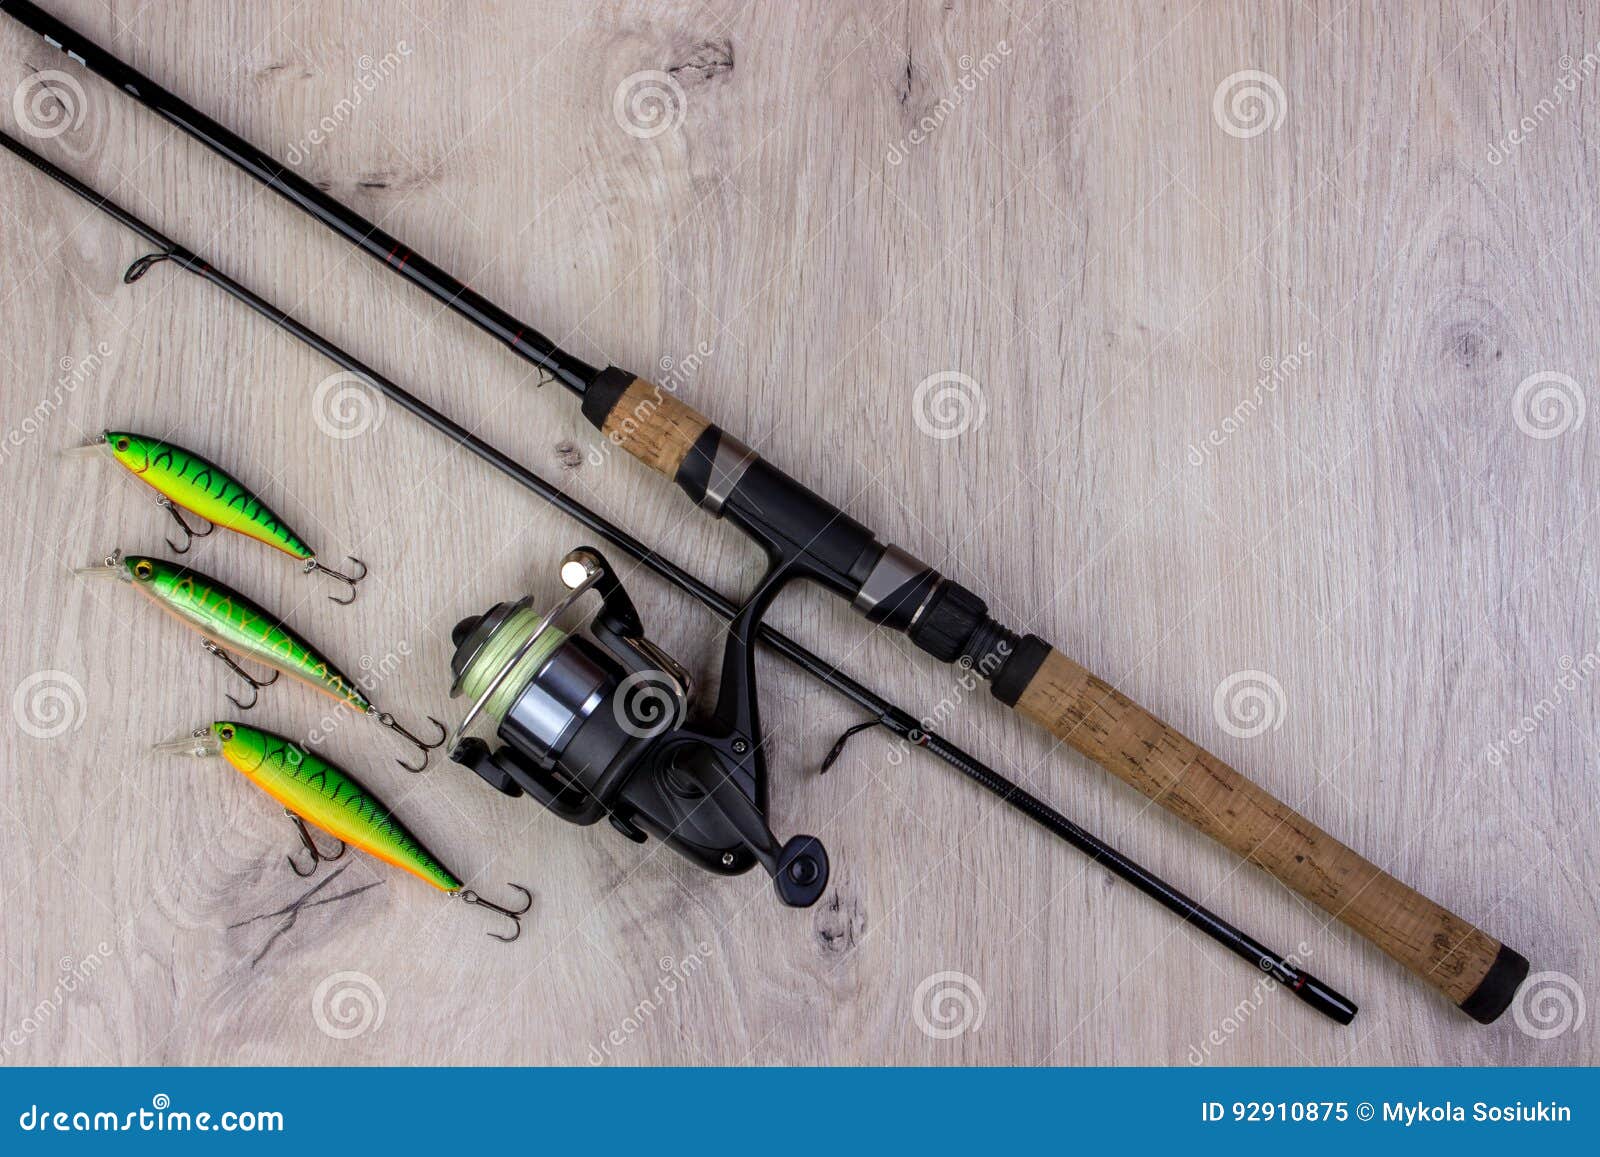 Fishing Tackle - Fishing Spinning, Hooks and Lures on Light Wooden  Background. Stock Image - Image of equipment, activity: 92910875